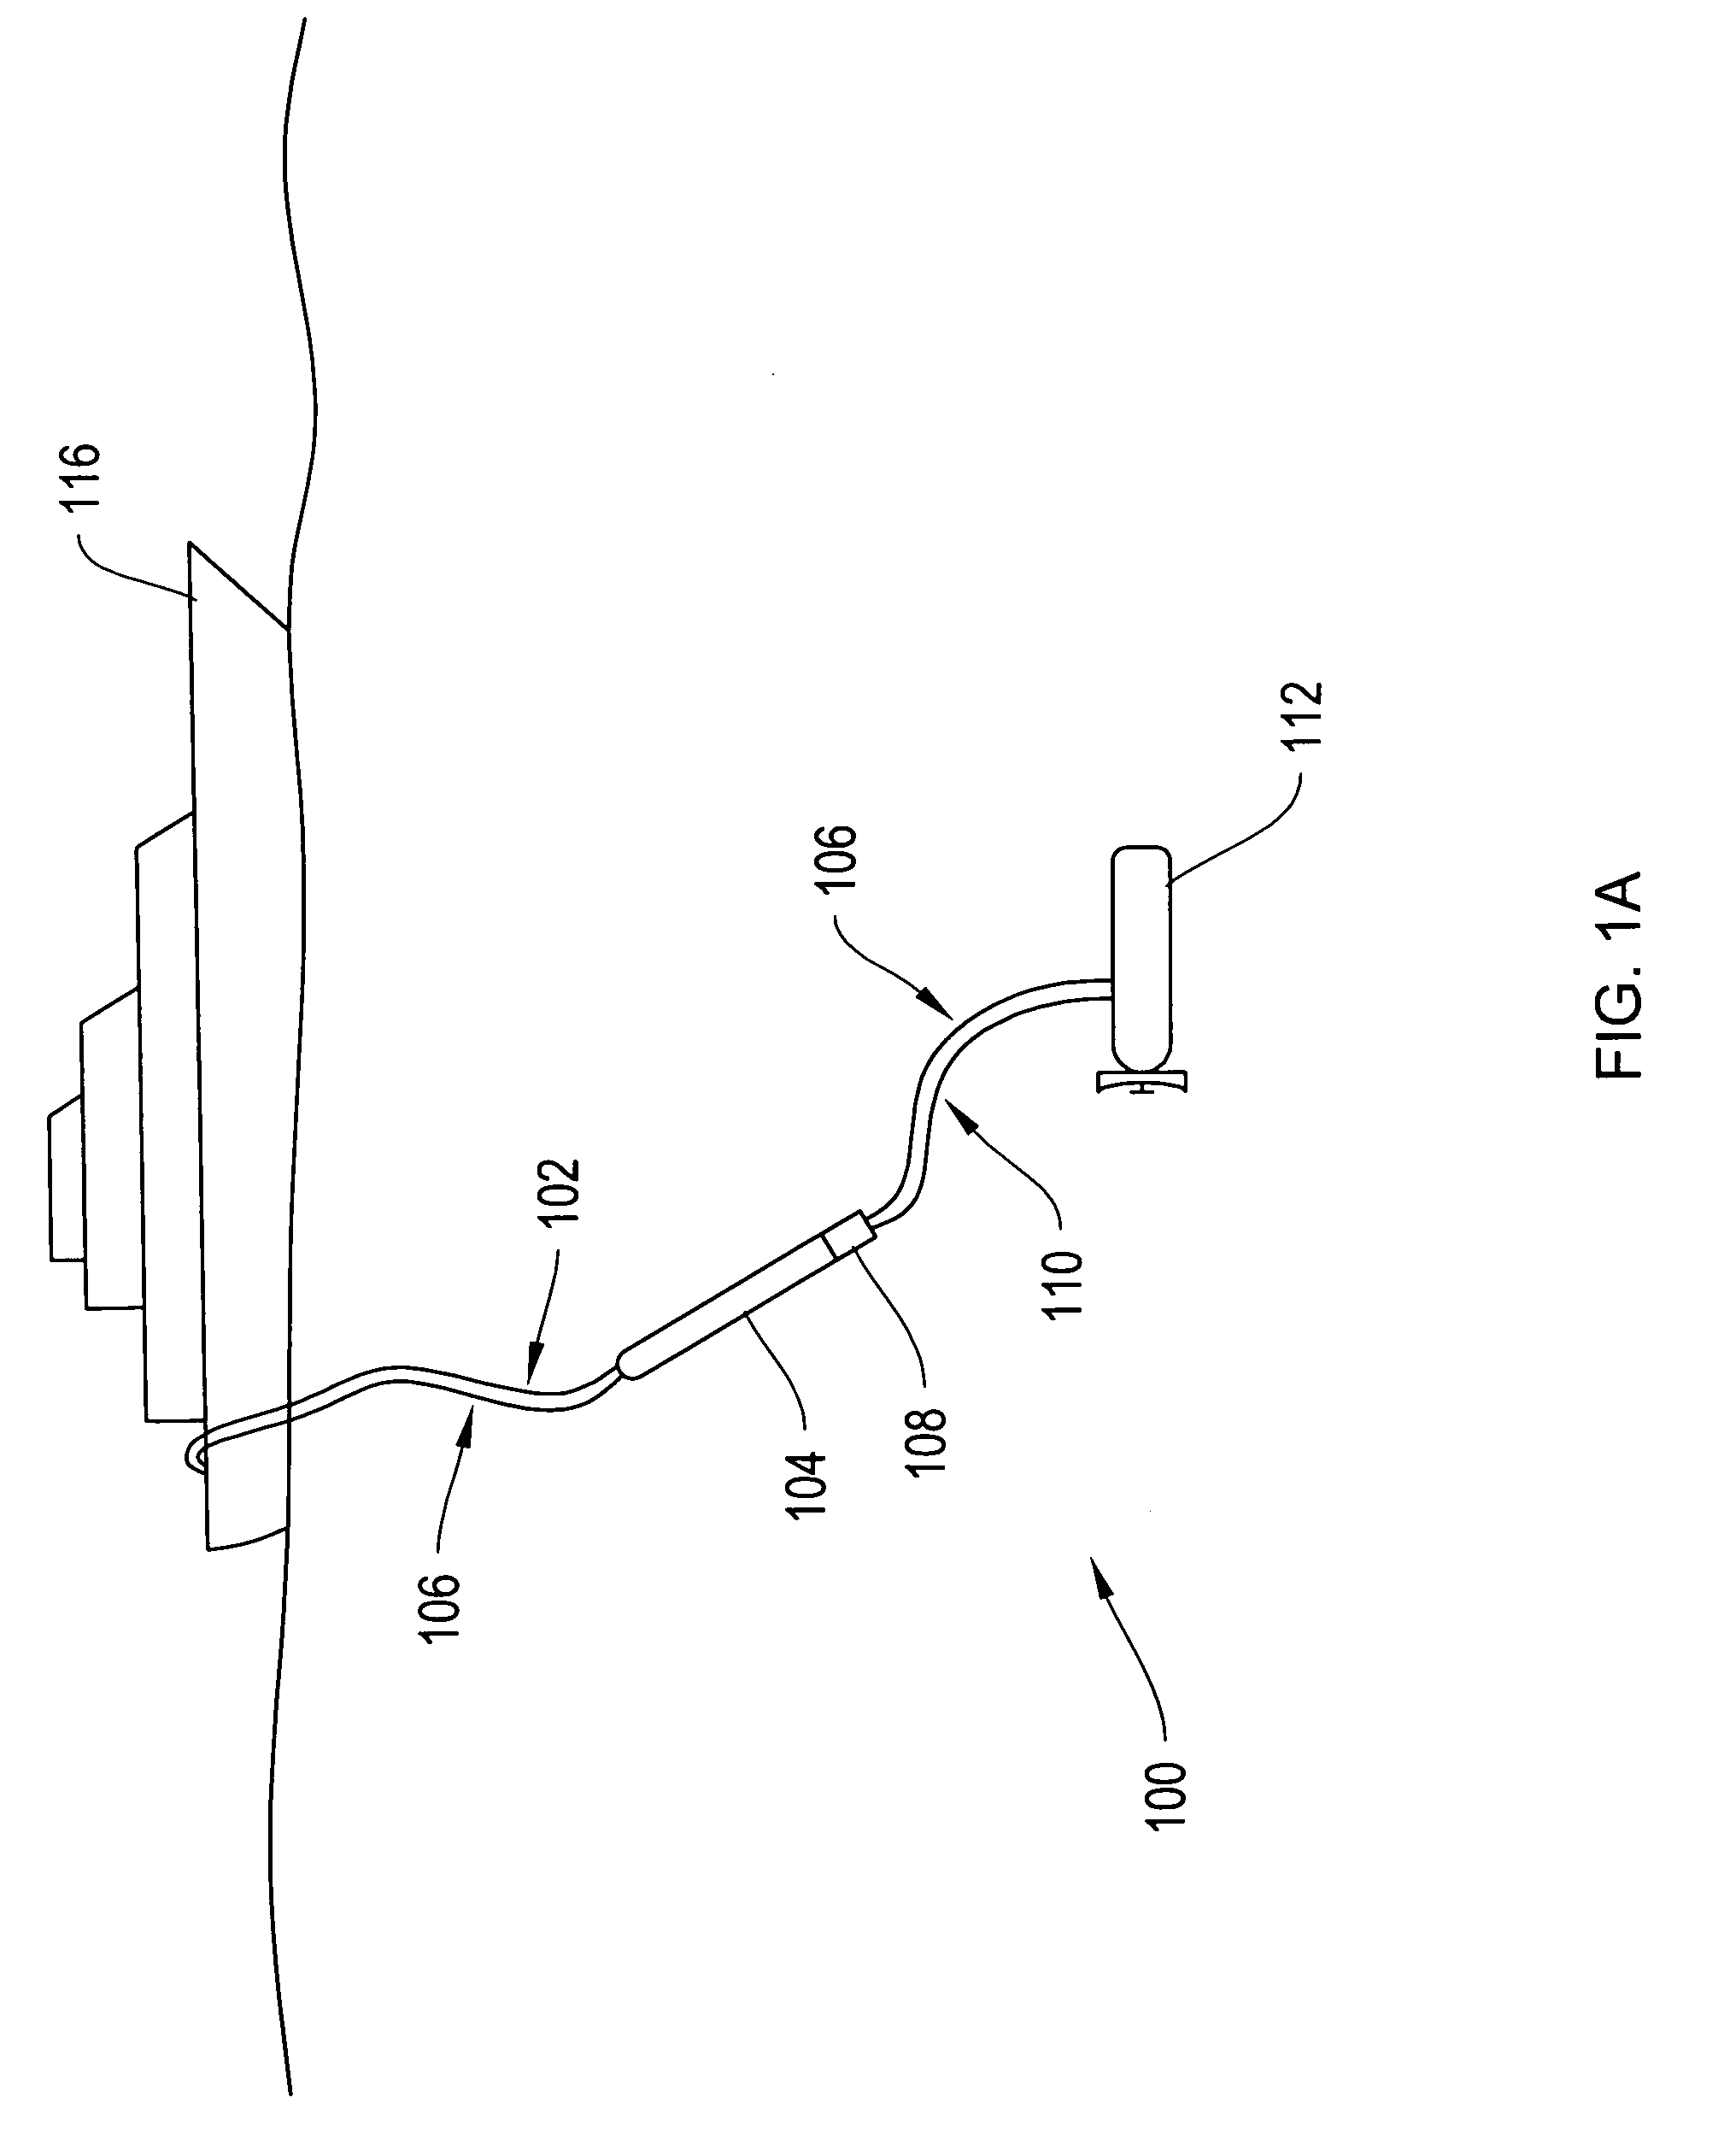 Systems and methods for tethering underwater vehicles